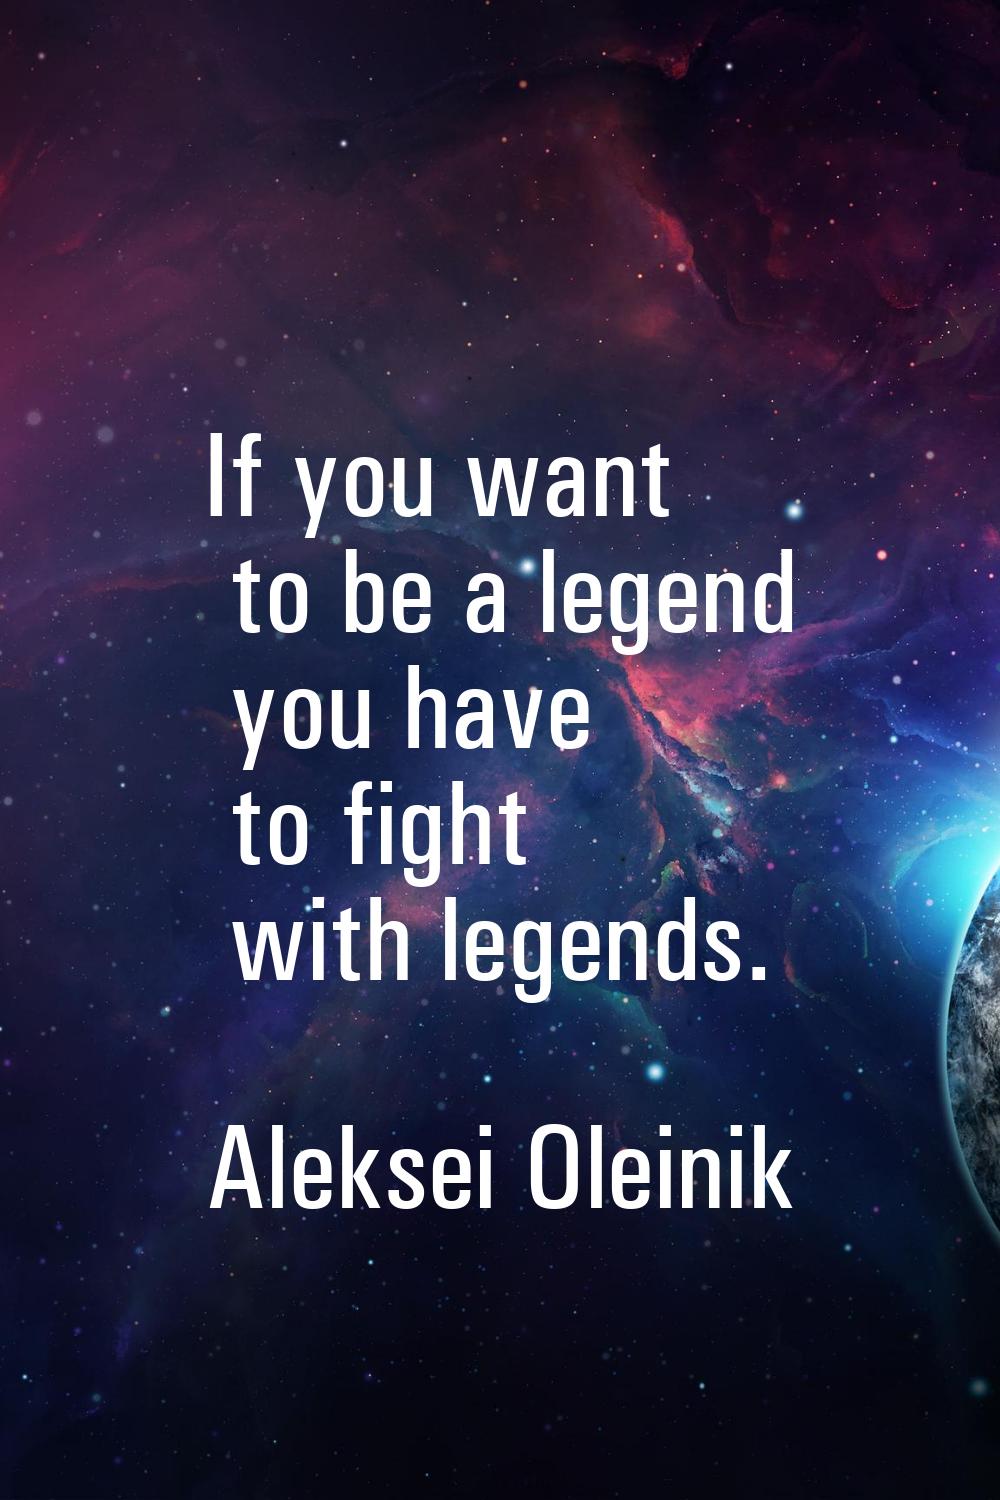 If you want to be a legend you have to fight with legends.